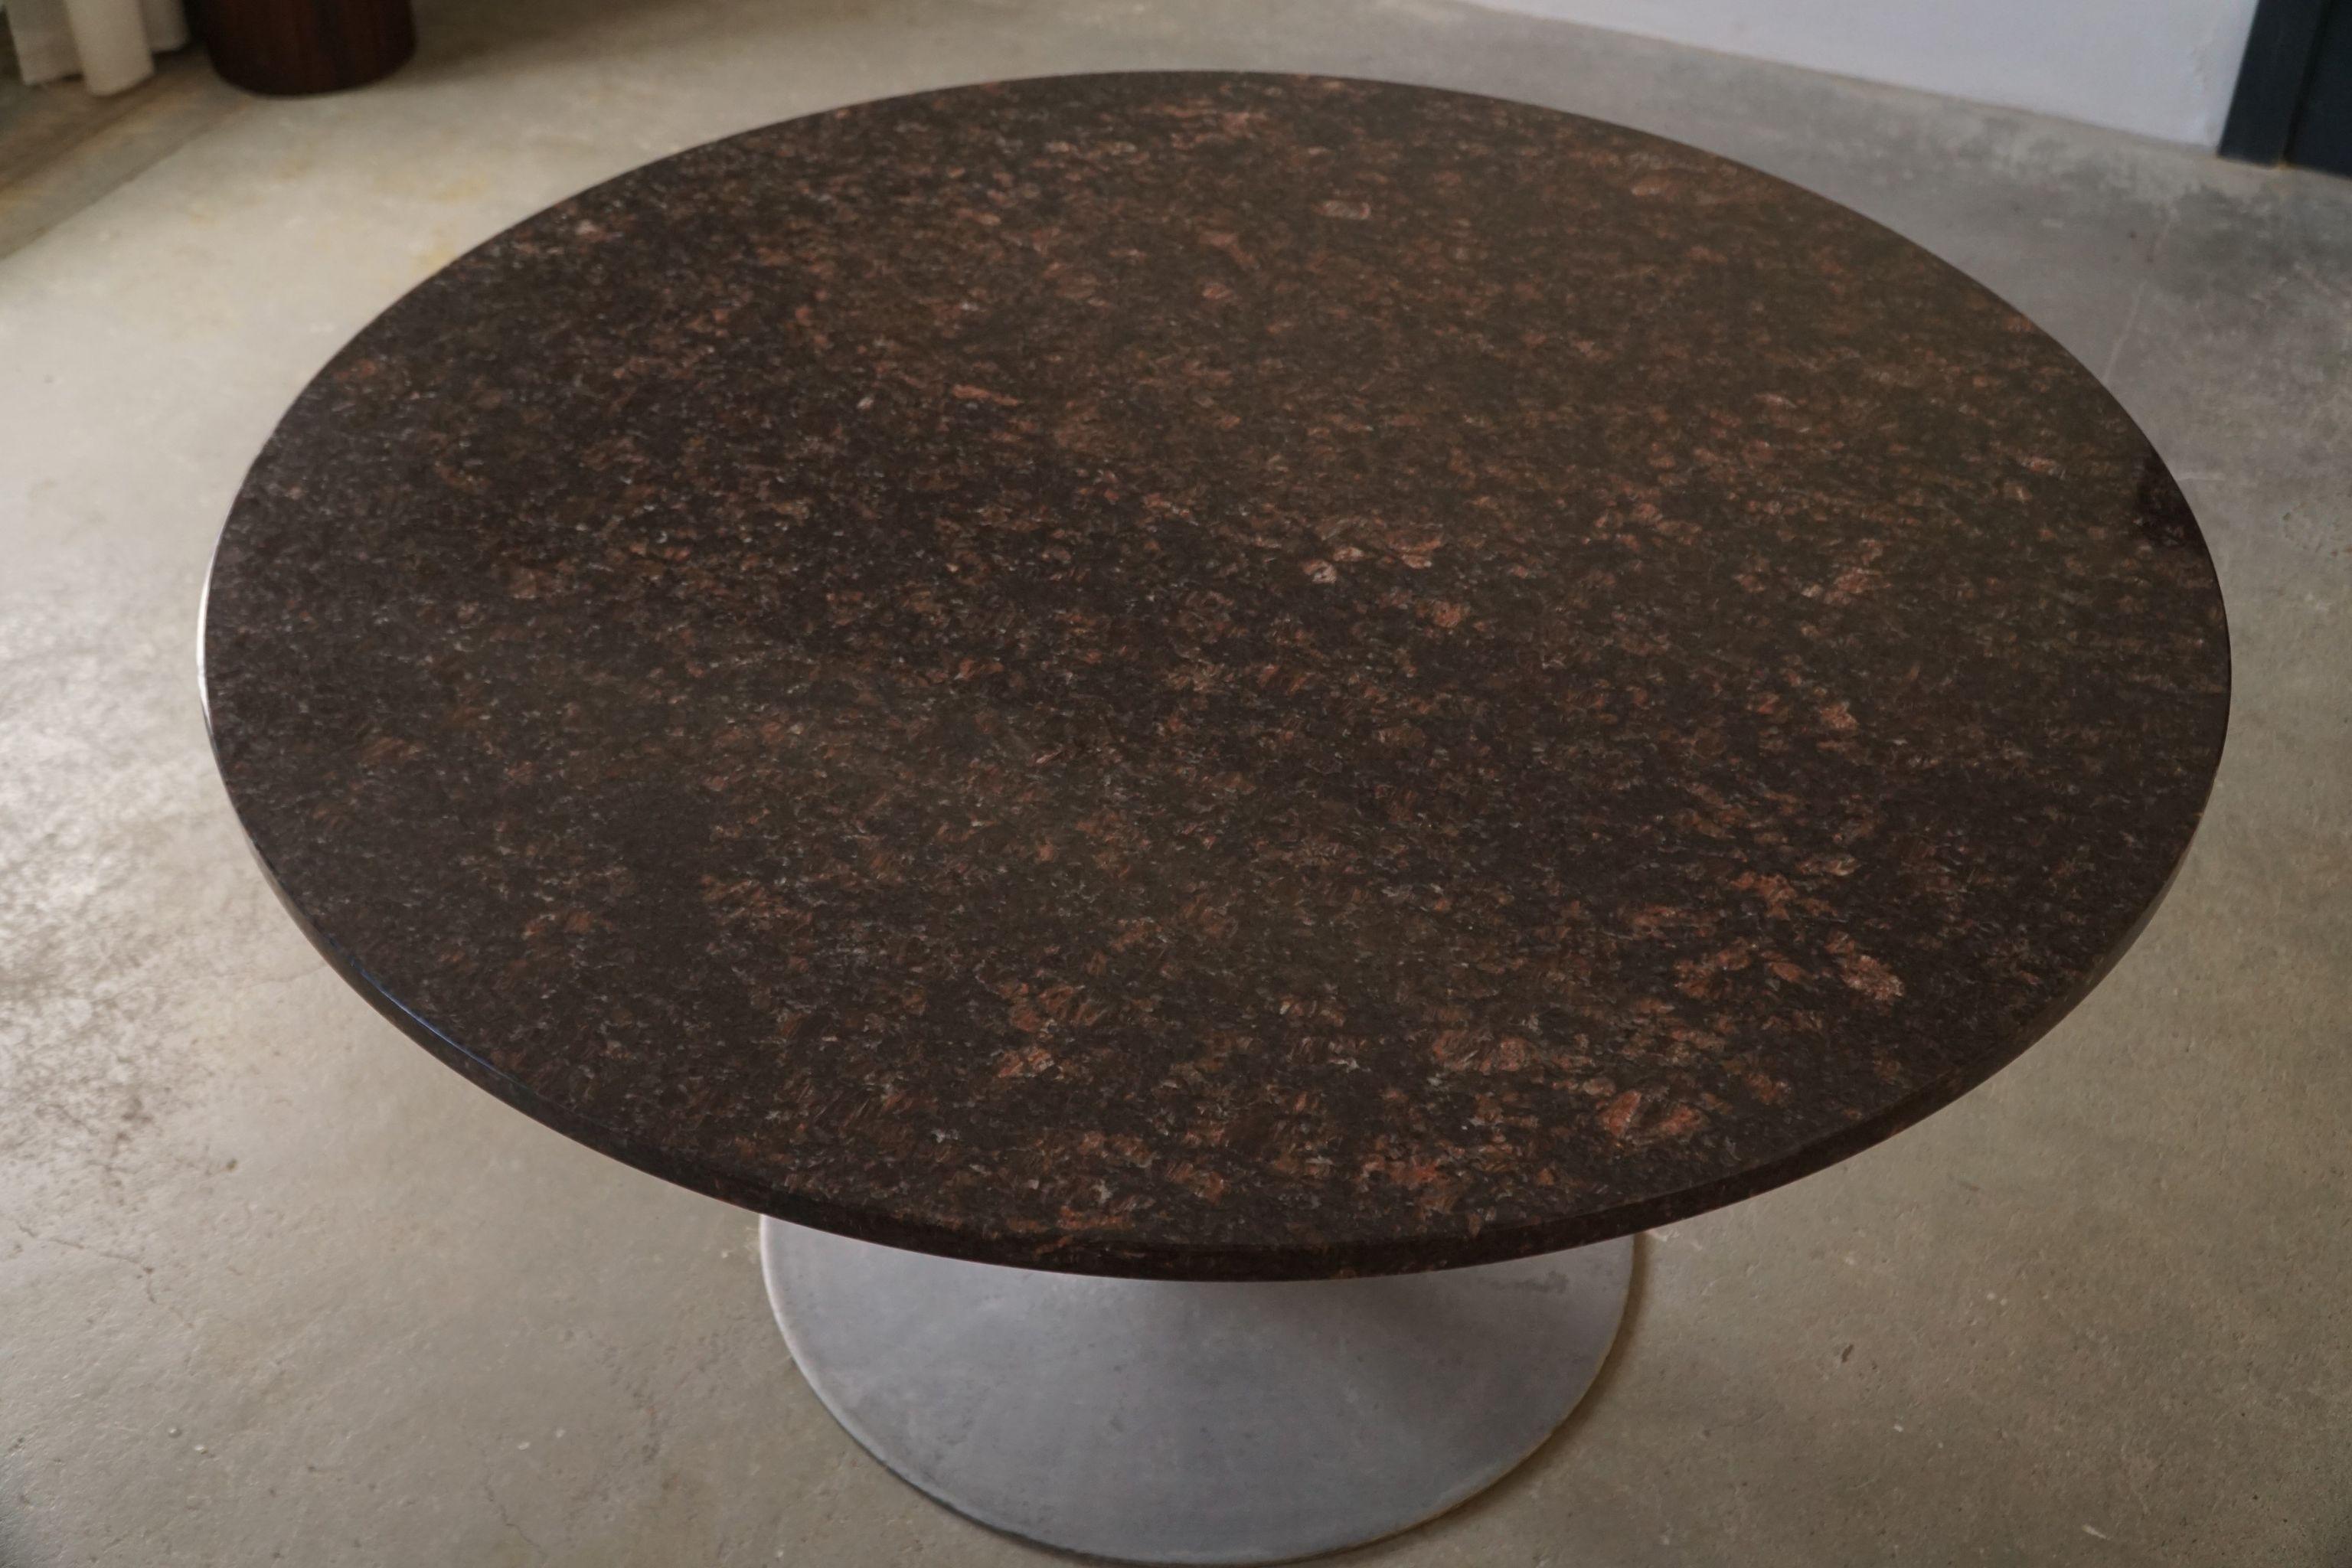 Brutalist Mid-Century Modern, Round Dining Table in Granite, Tulip Style, Made in 1970s